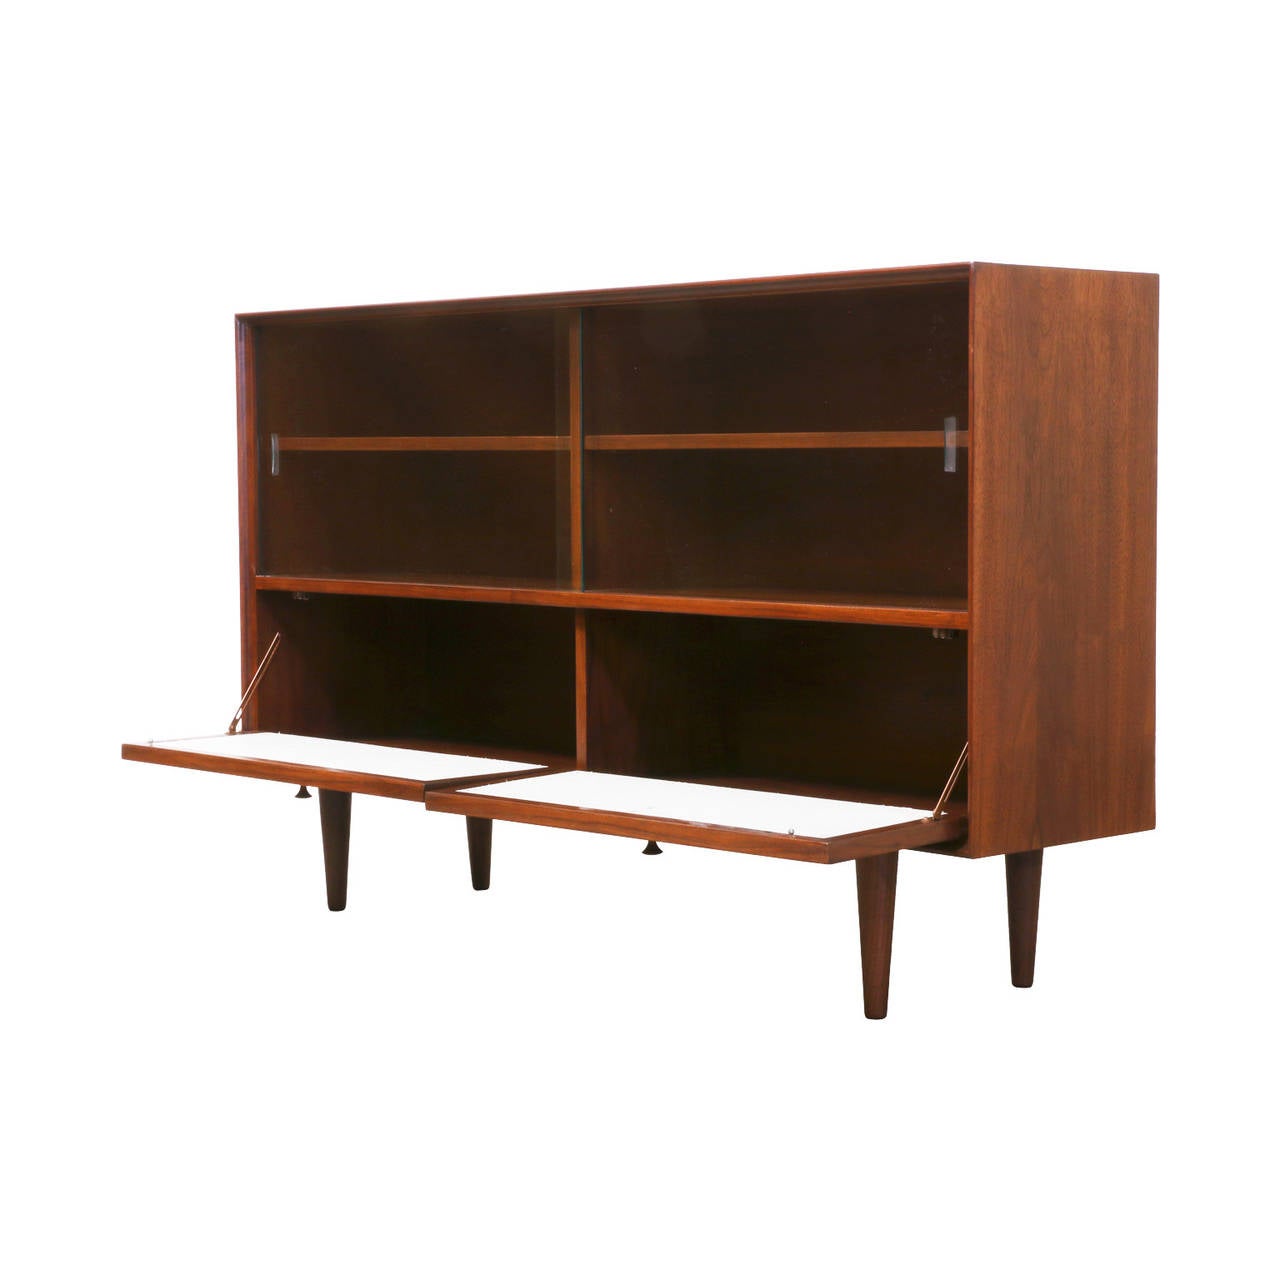 Designer: Unknown
Manufacturer: Unknown
Period/Style: Mid Century Modern
Country: United States
Date: 1950s

Dimensions: 34″H x 54″L x 13″W
Materials: Walnut, Glass
Condition: Excellent – Newly Refinished
Number of Items: 1
ID Number: